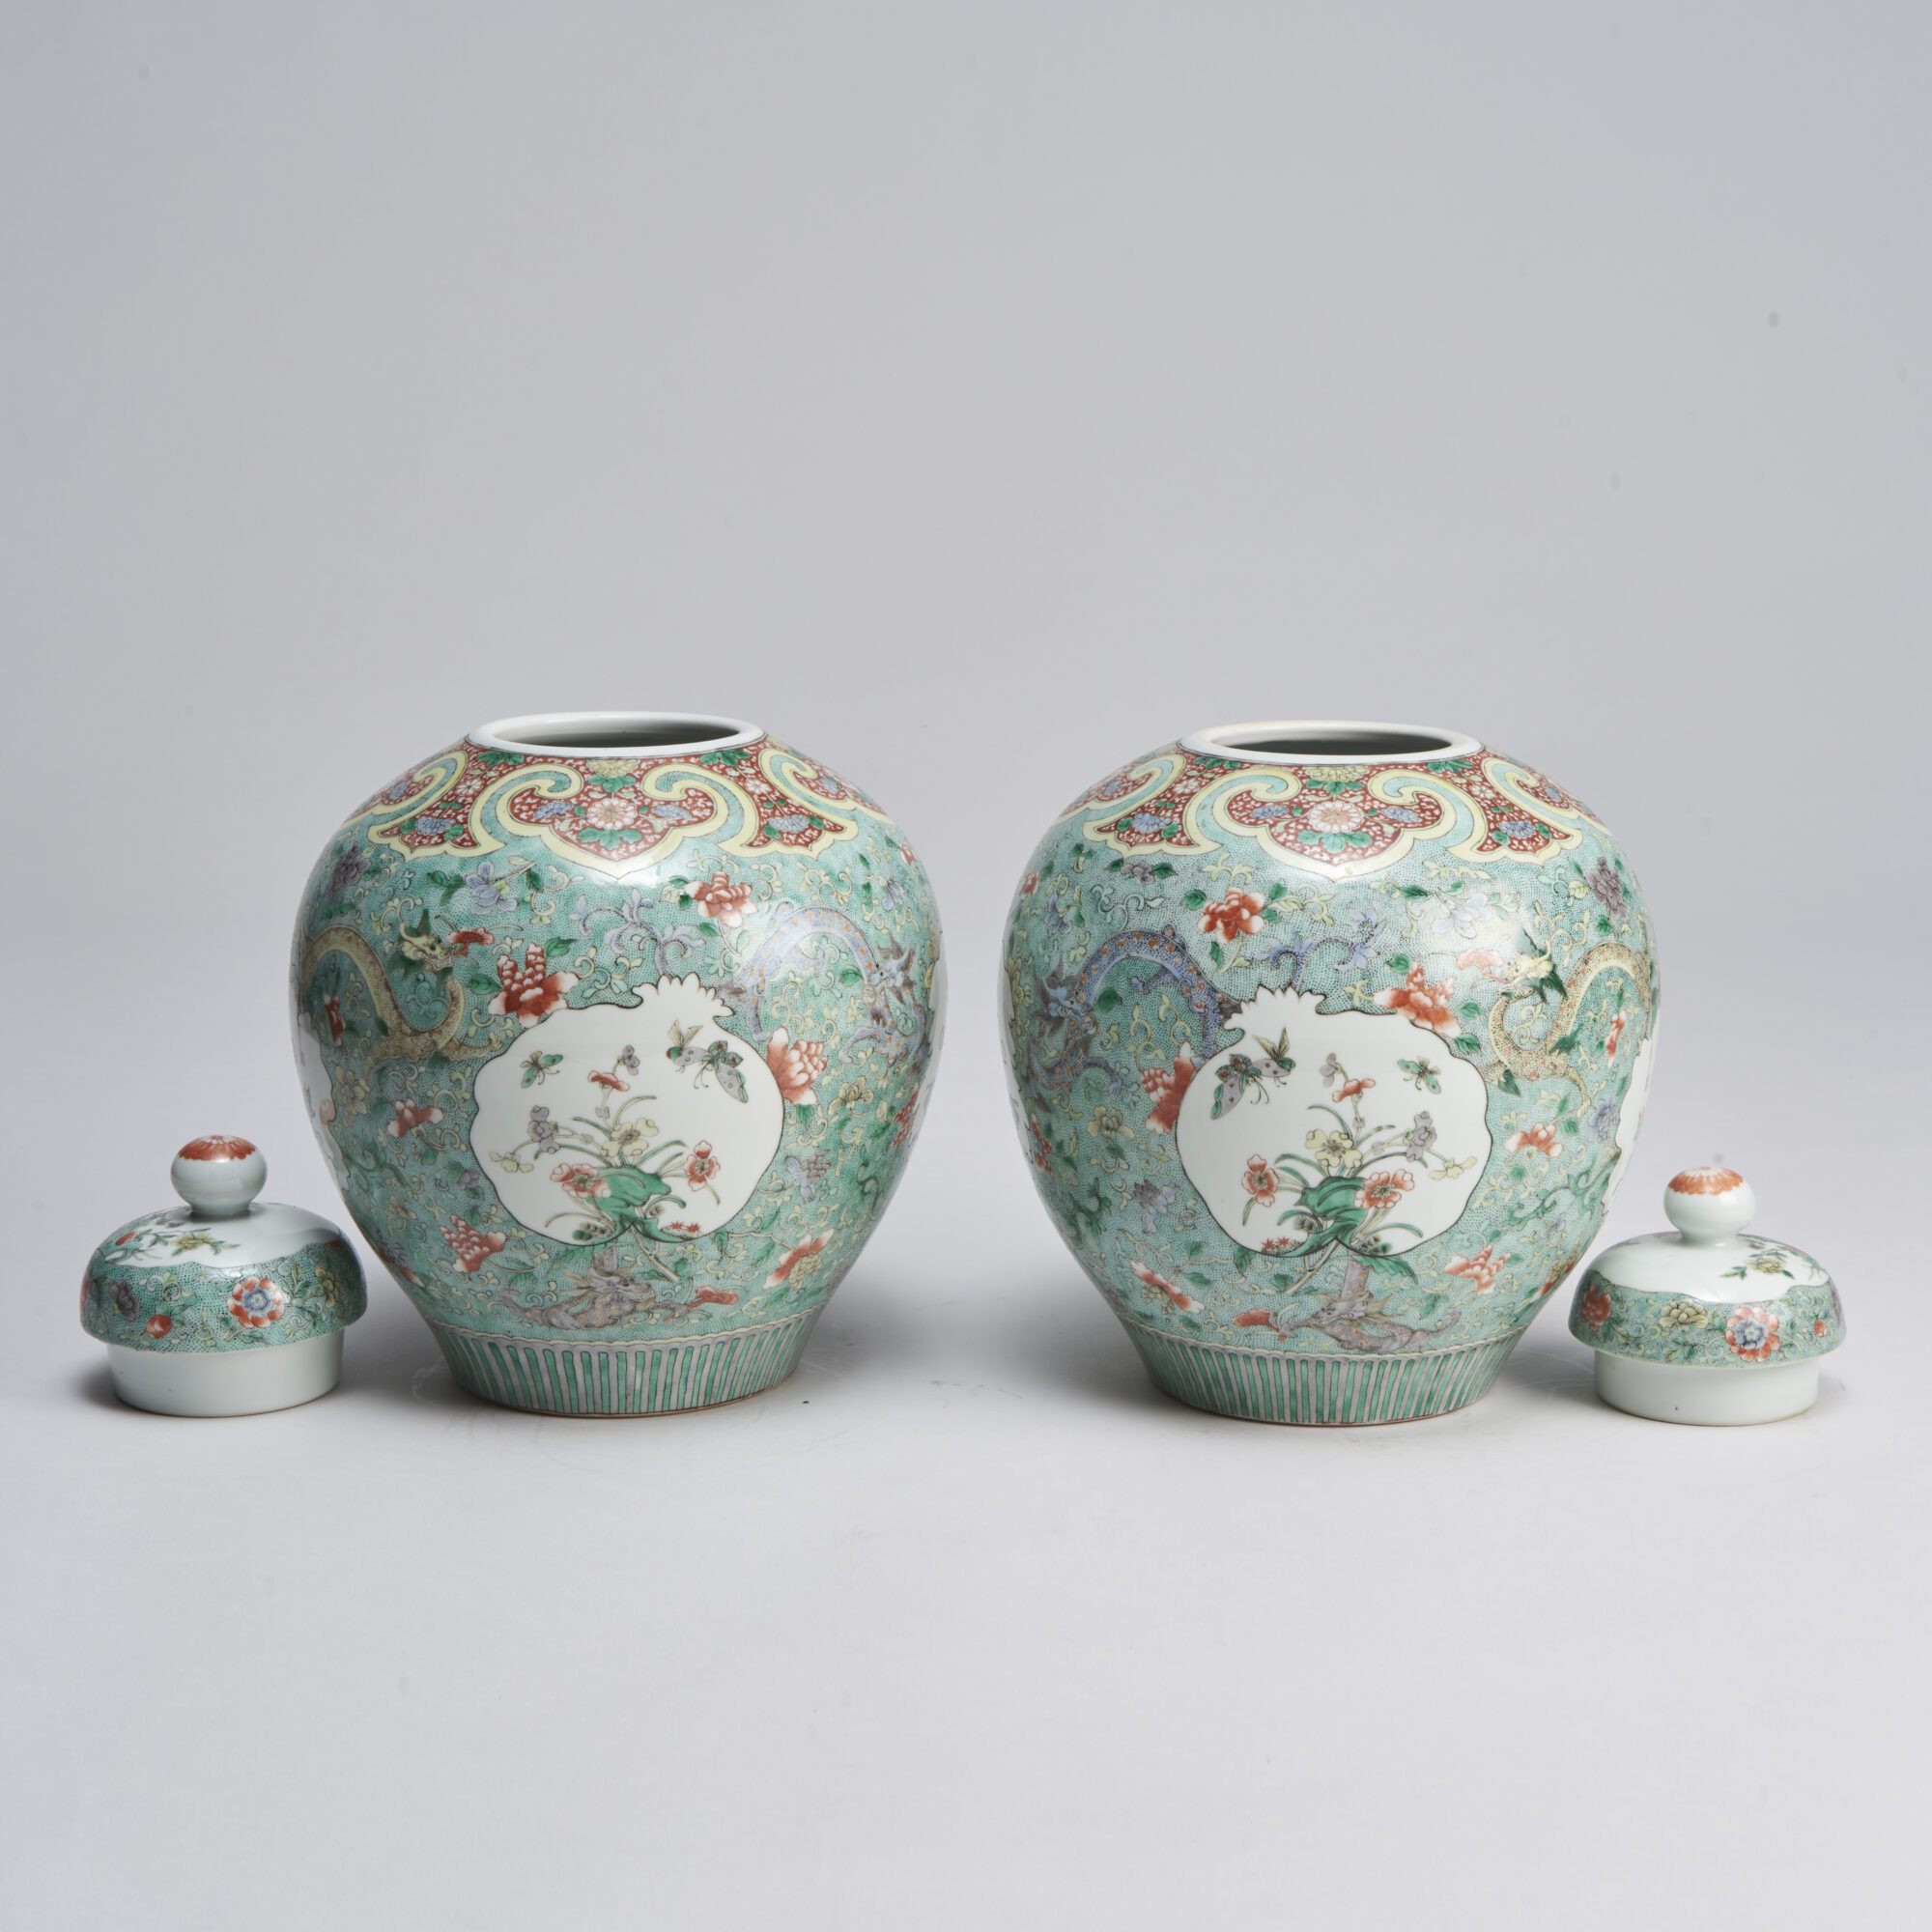 A finely painted pair of 19th Century Chinese famille verte jars and covers from Kevin Page